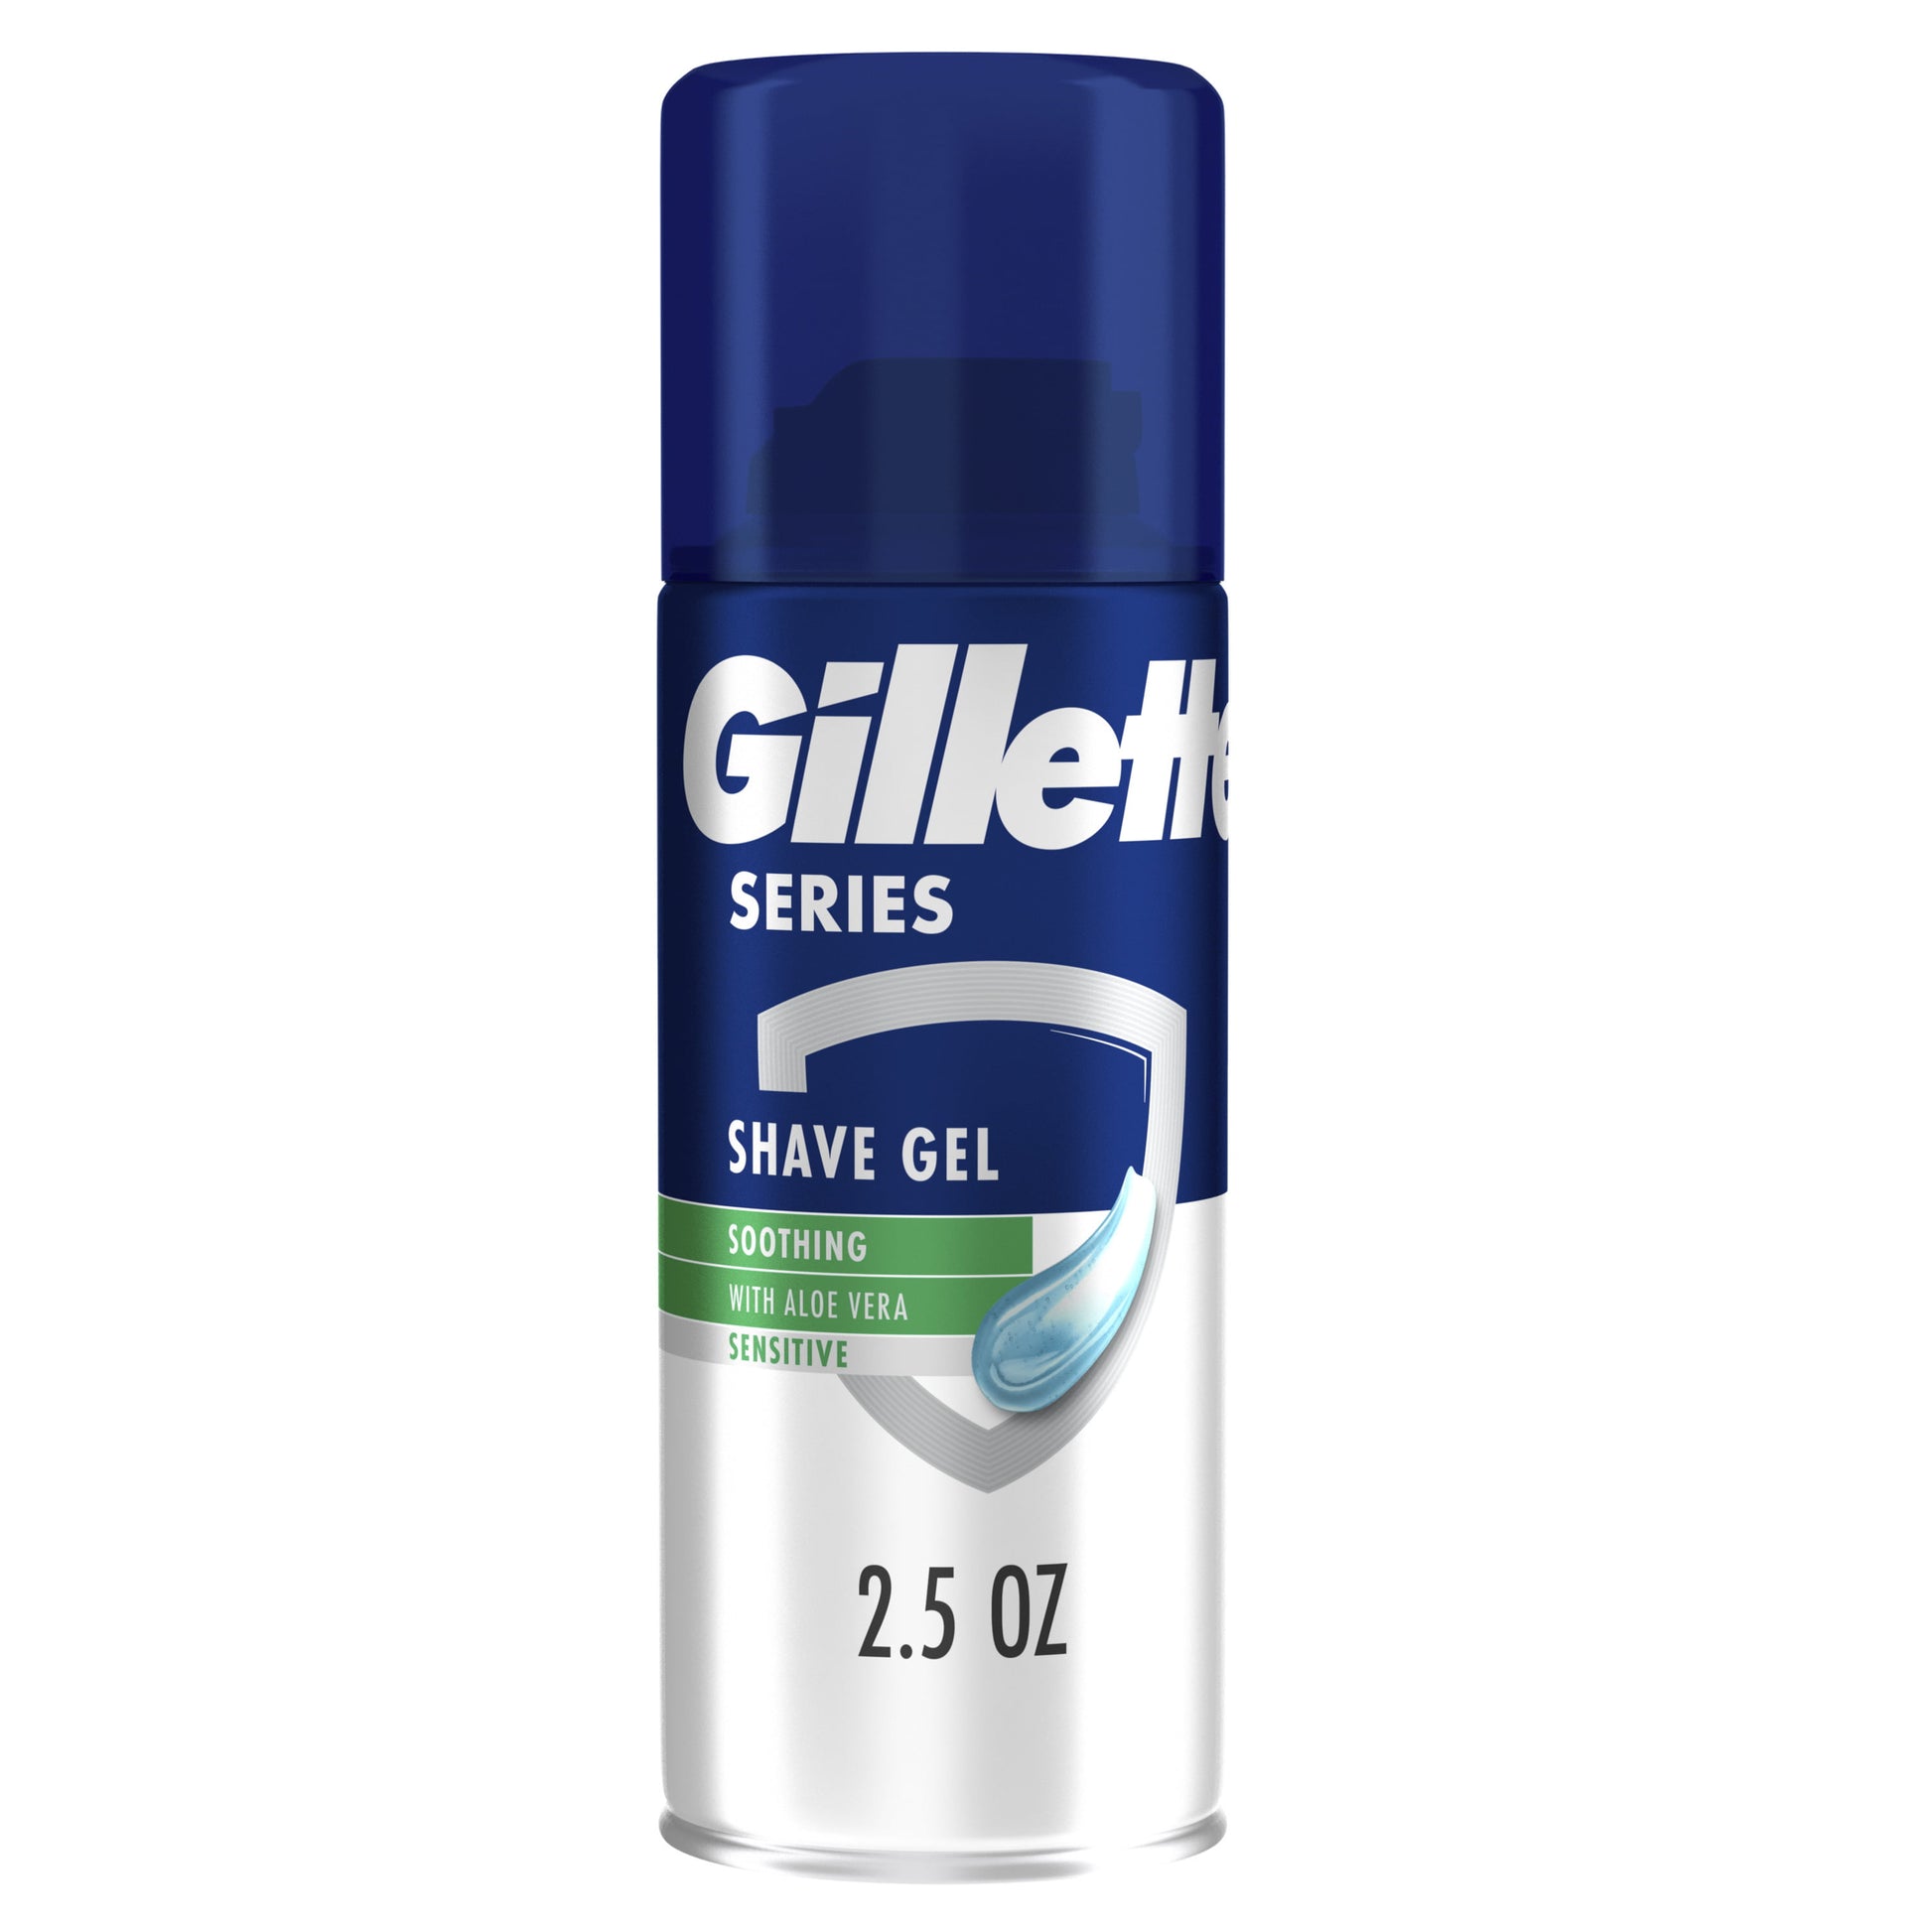 Gillette Series - Soothing Shave Gel for Men - With Aloe Vera - 75 ML (2.5oz)